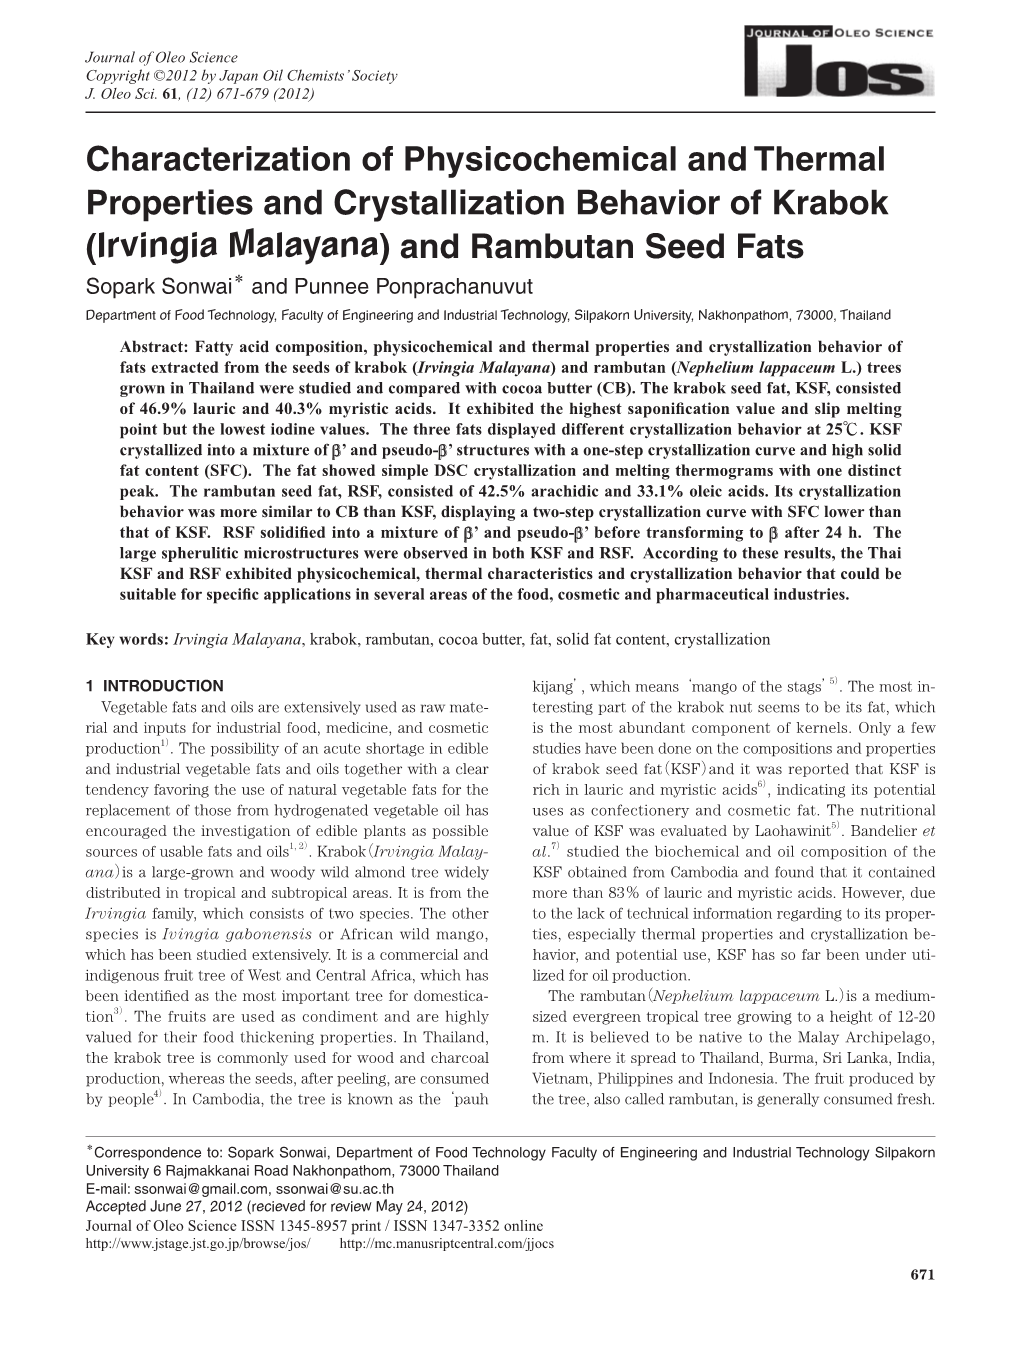 Characterization of Physicochemical and Thermal Properties and Crystallization Behavior of Krabok (Irvingia Malayana) and Rambut